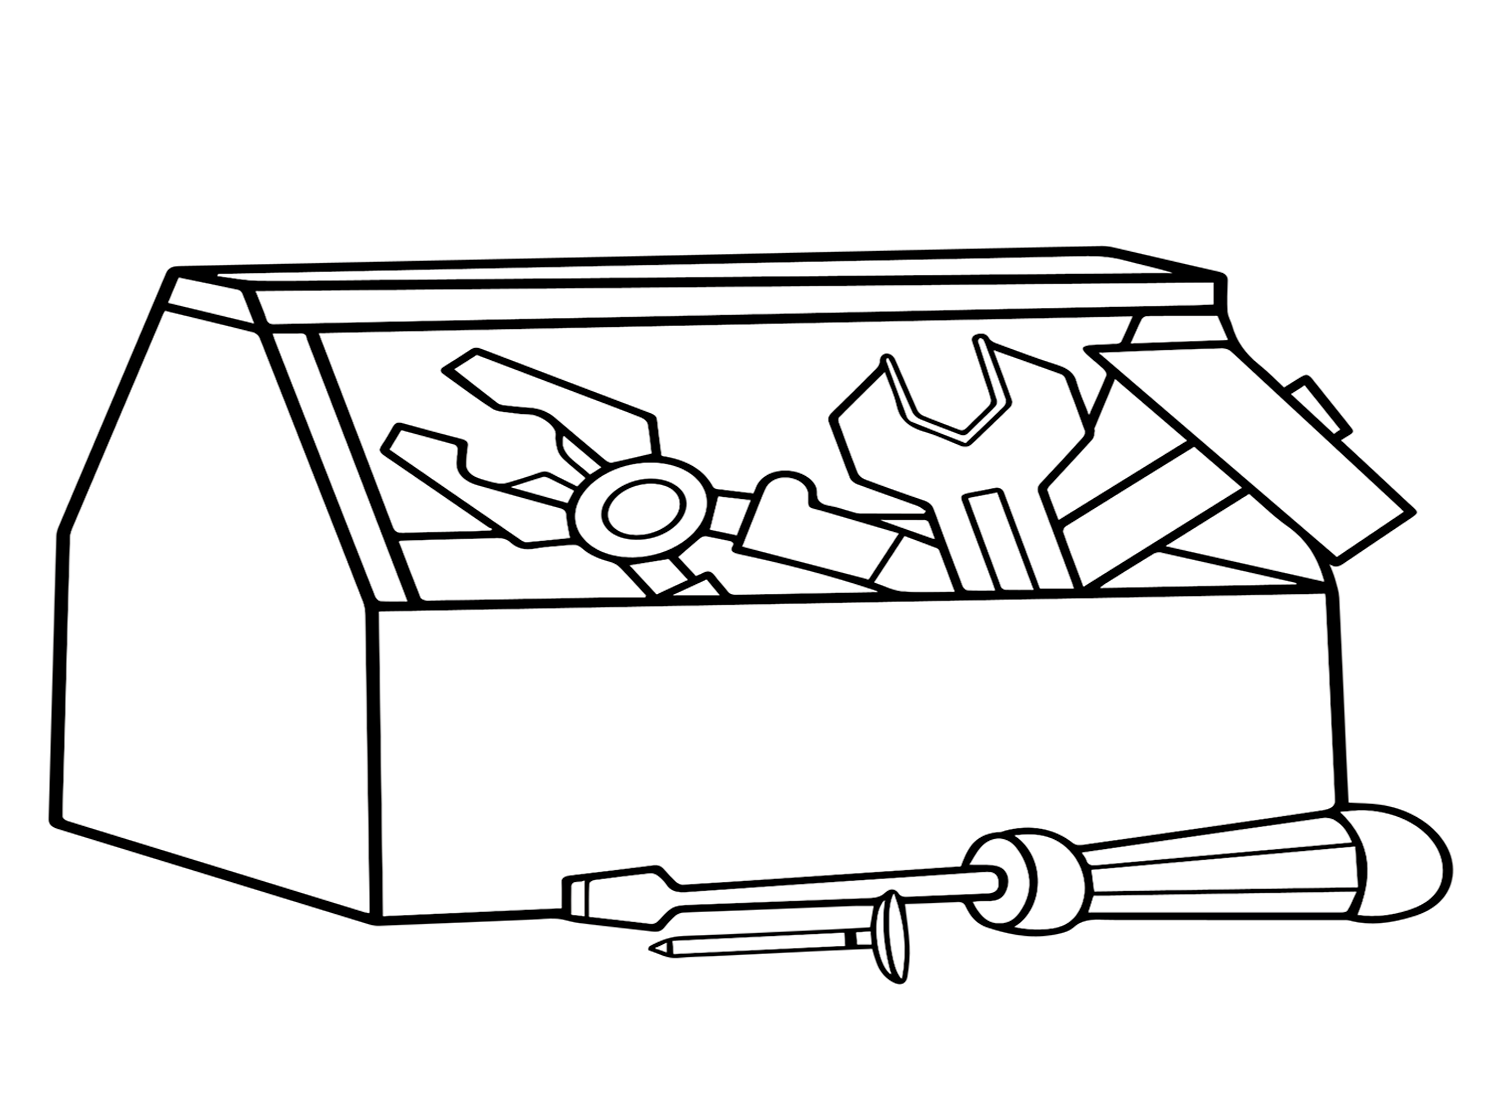 Toolbox and Wrench Coloring Pages